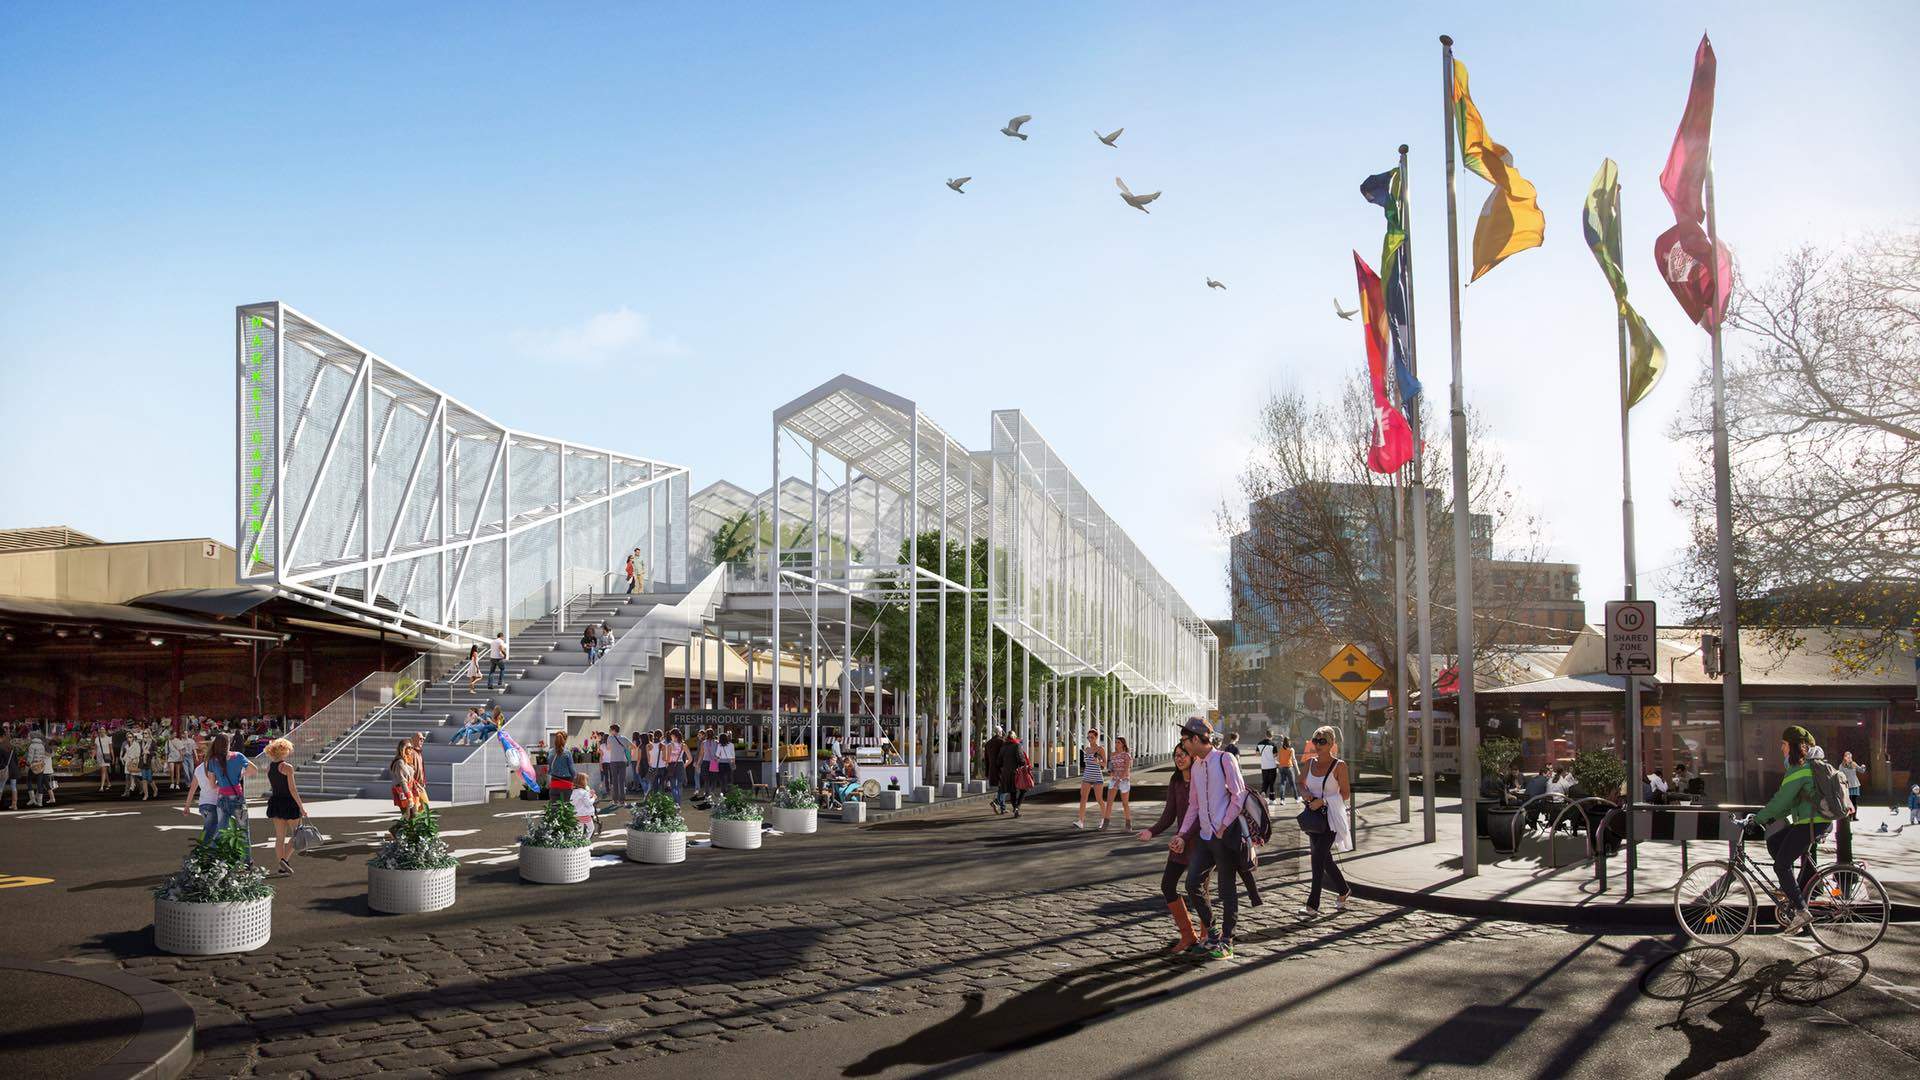 Melbourne's Queen Victoria Market Is Getting an Elevated, Greenhouse-Style Pavilion